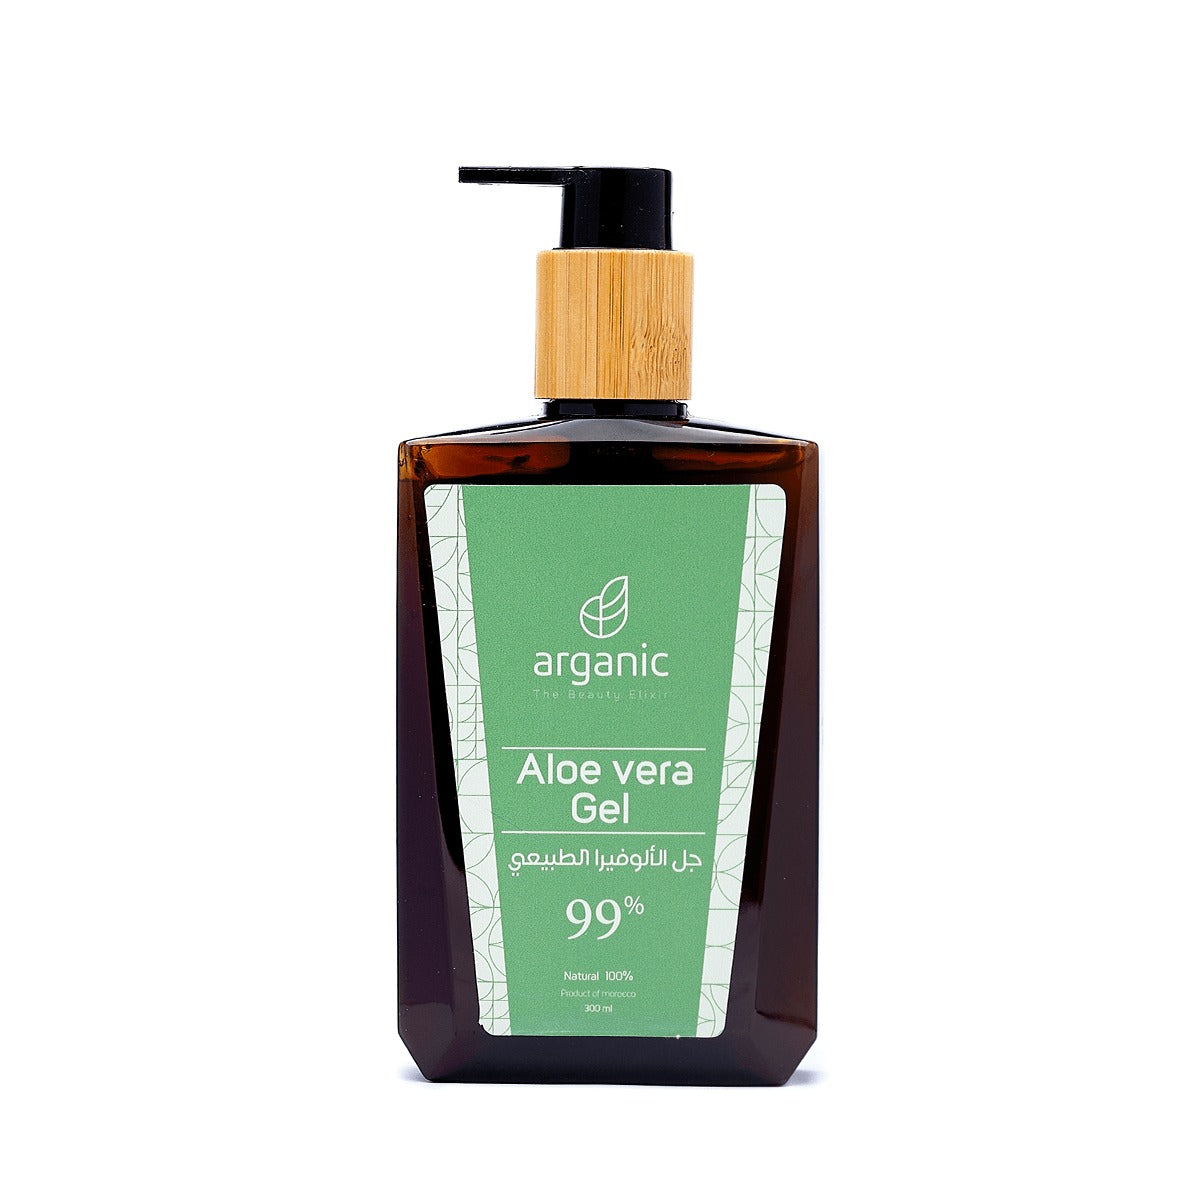 Aloe vera gel in clear bottle with 99% purity indication.